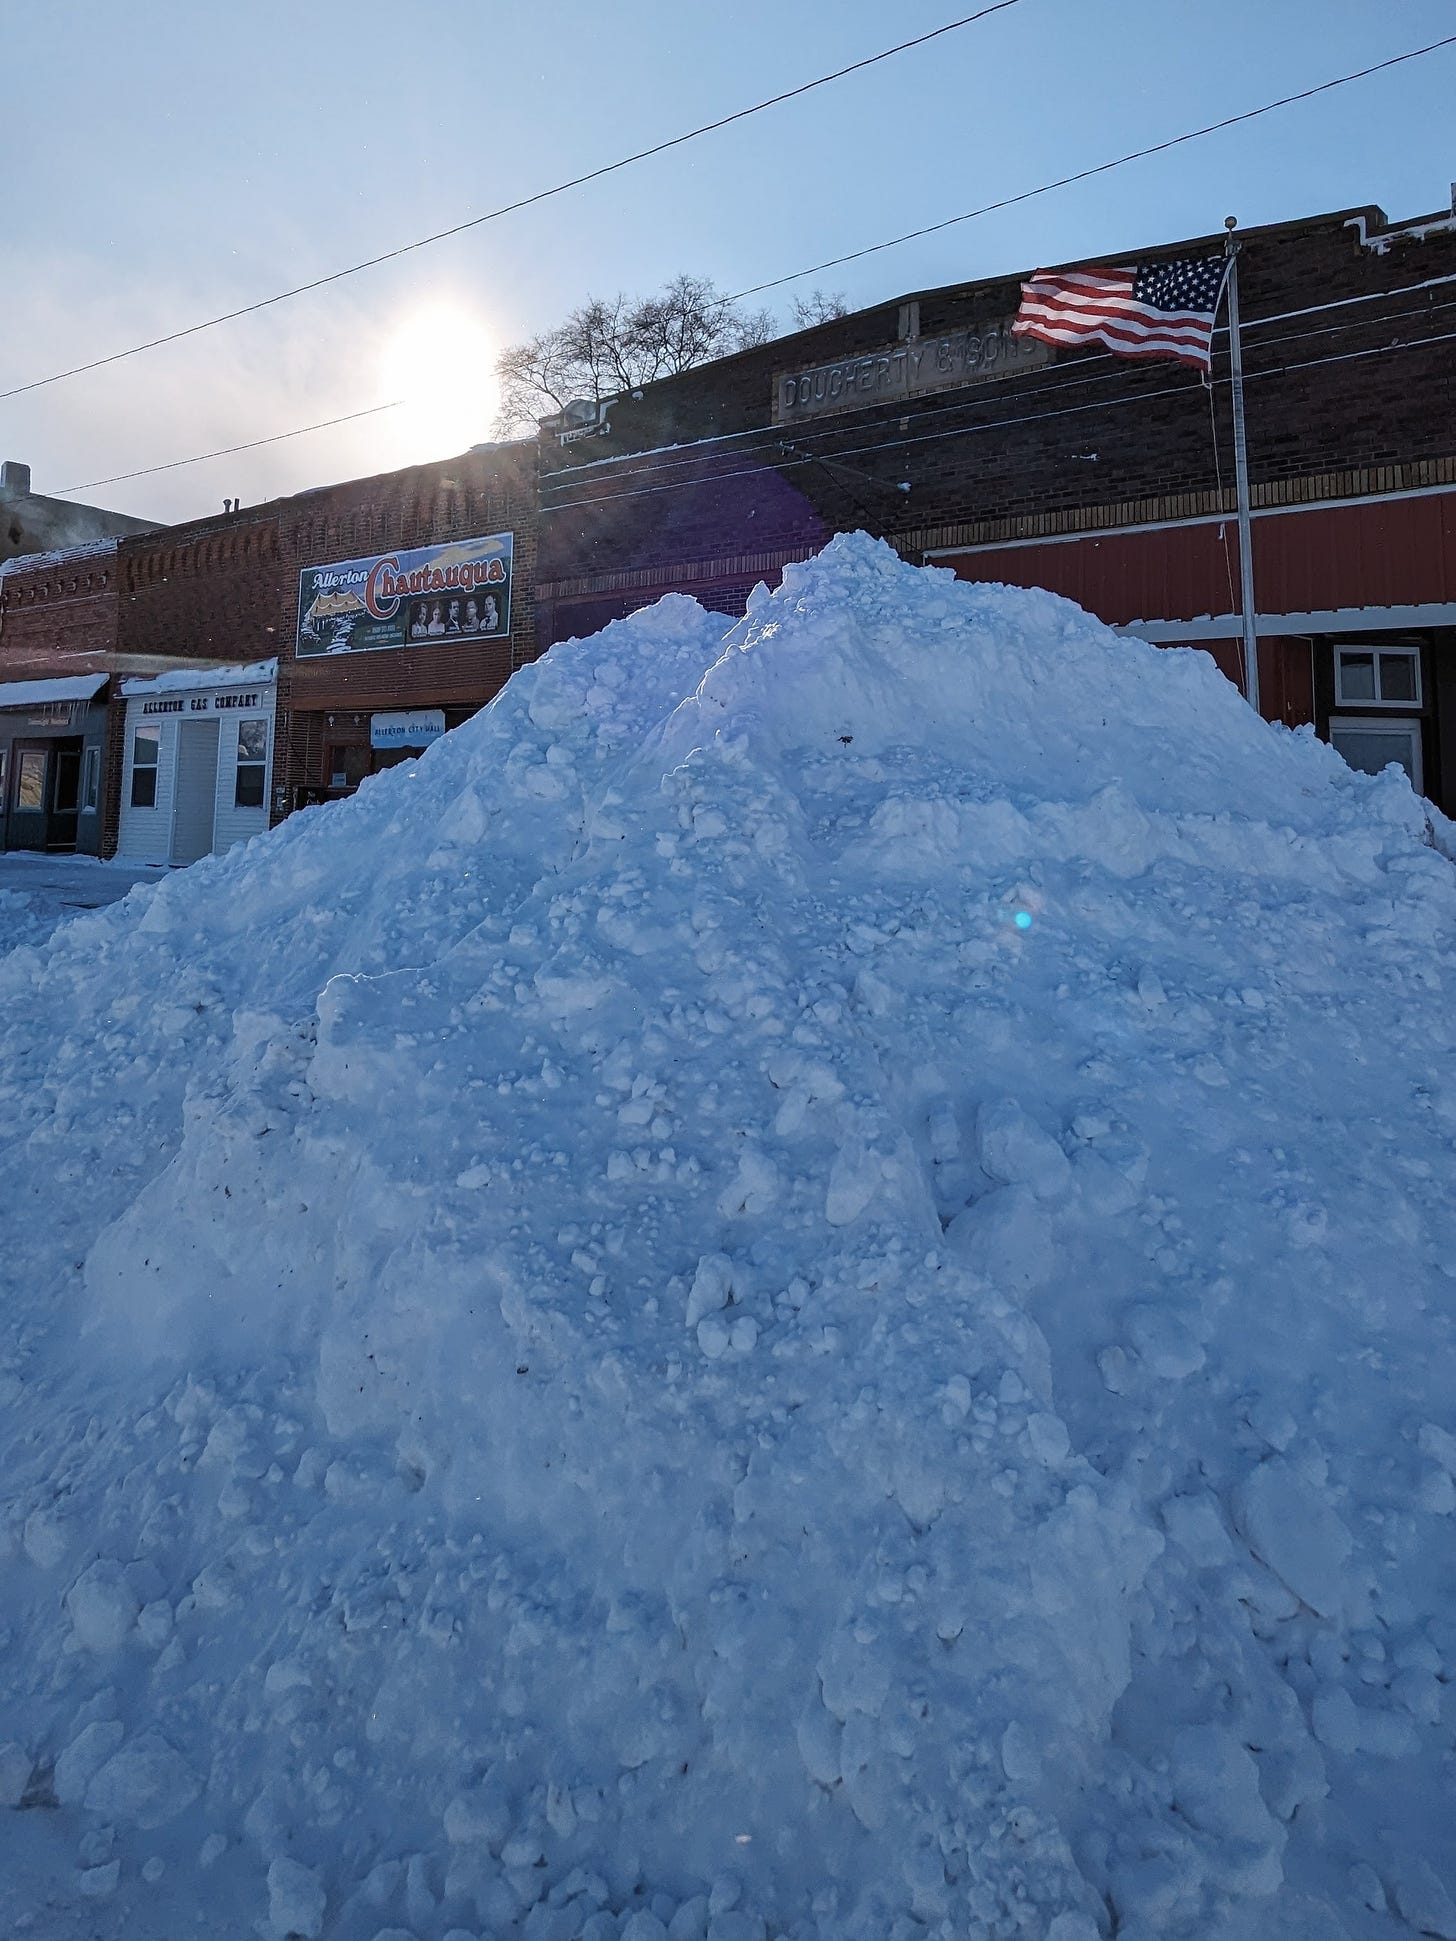 A large pile of snow in front of several brick buildings and an American flag, with sun setting behind it